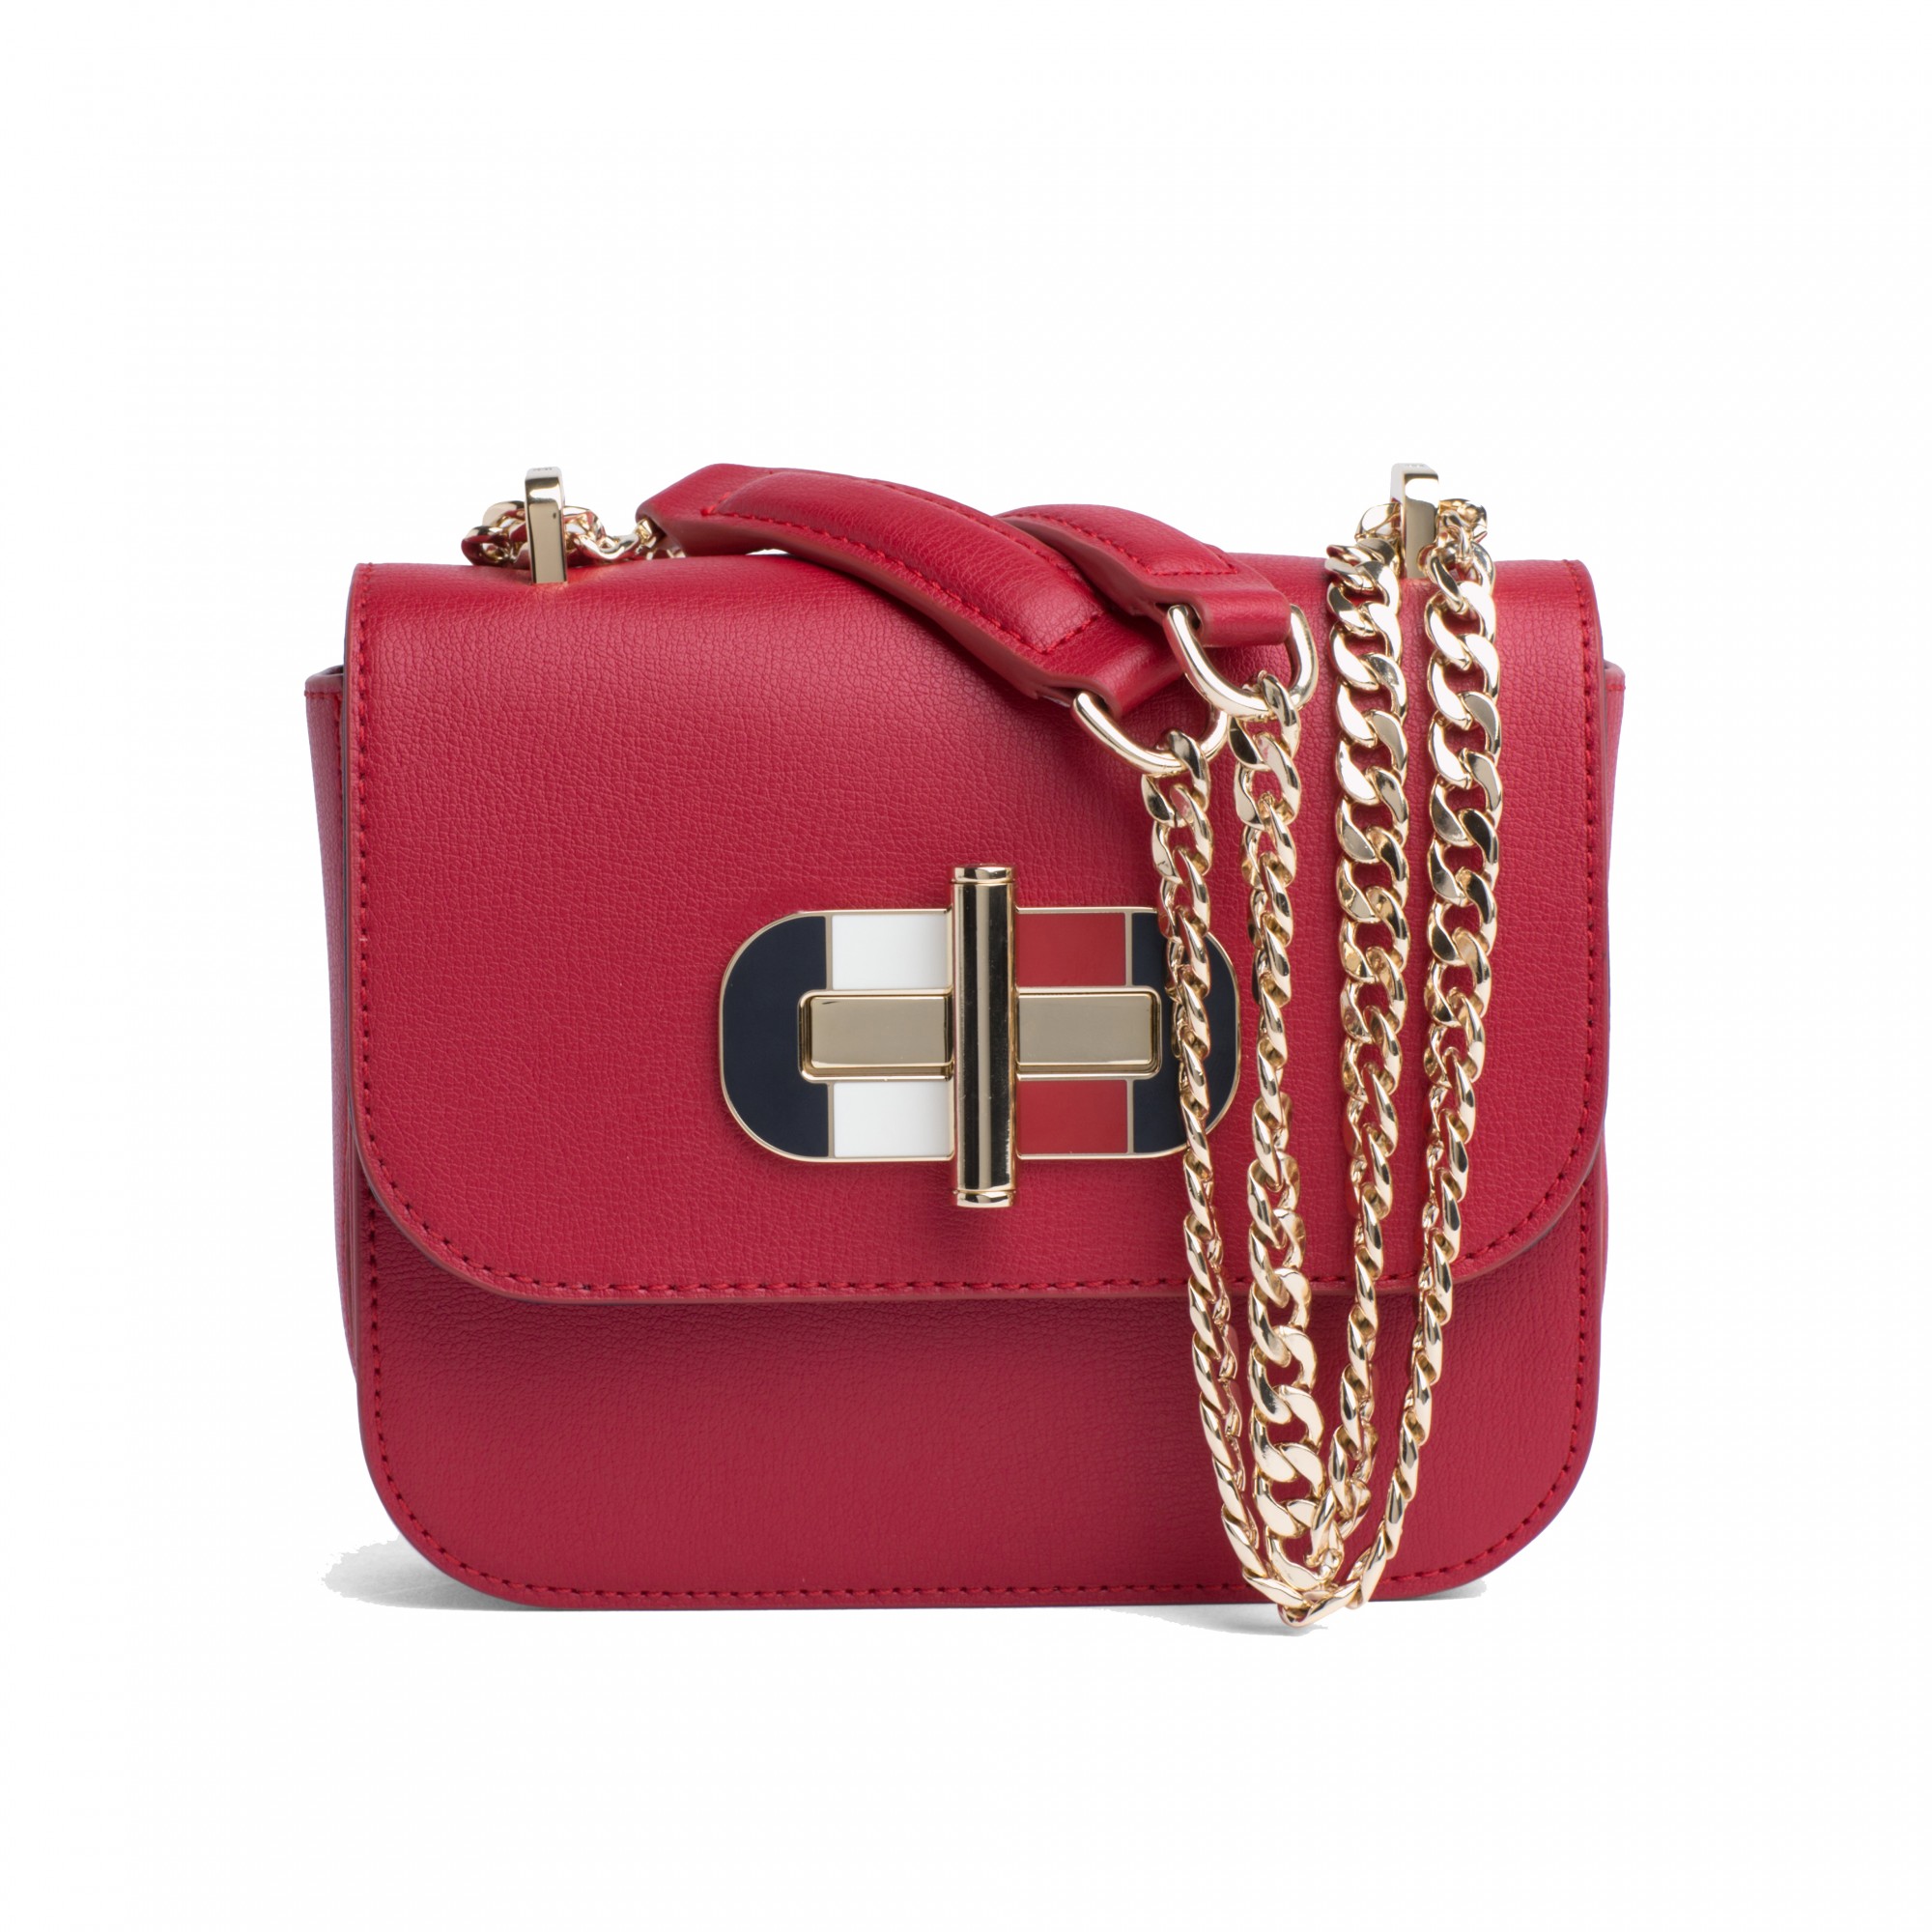 TOMMY HILFIGER Bag AW06441 614 RED